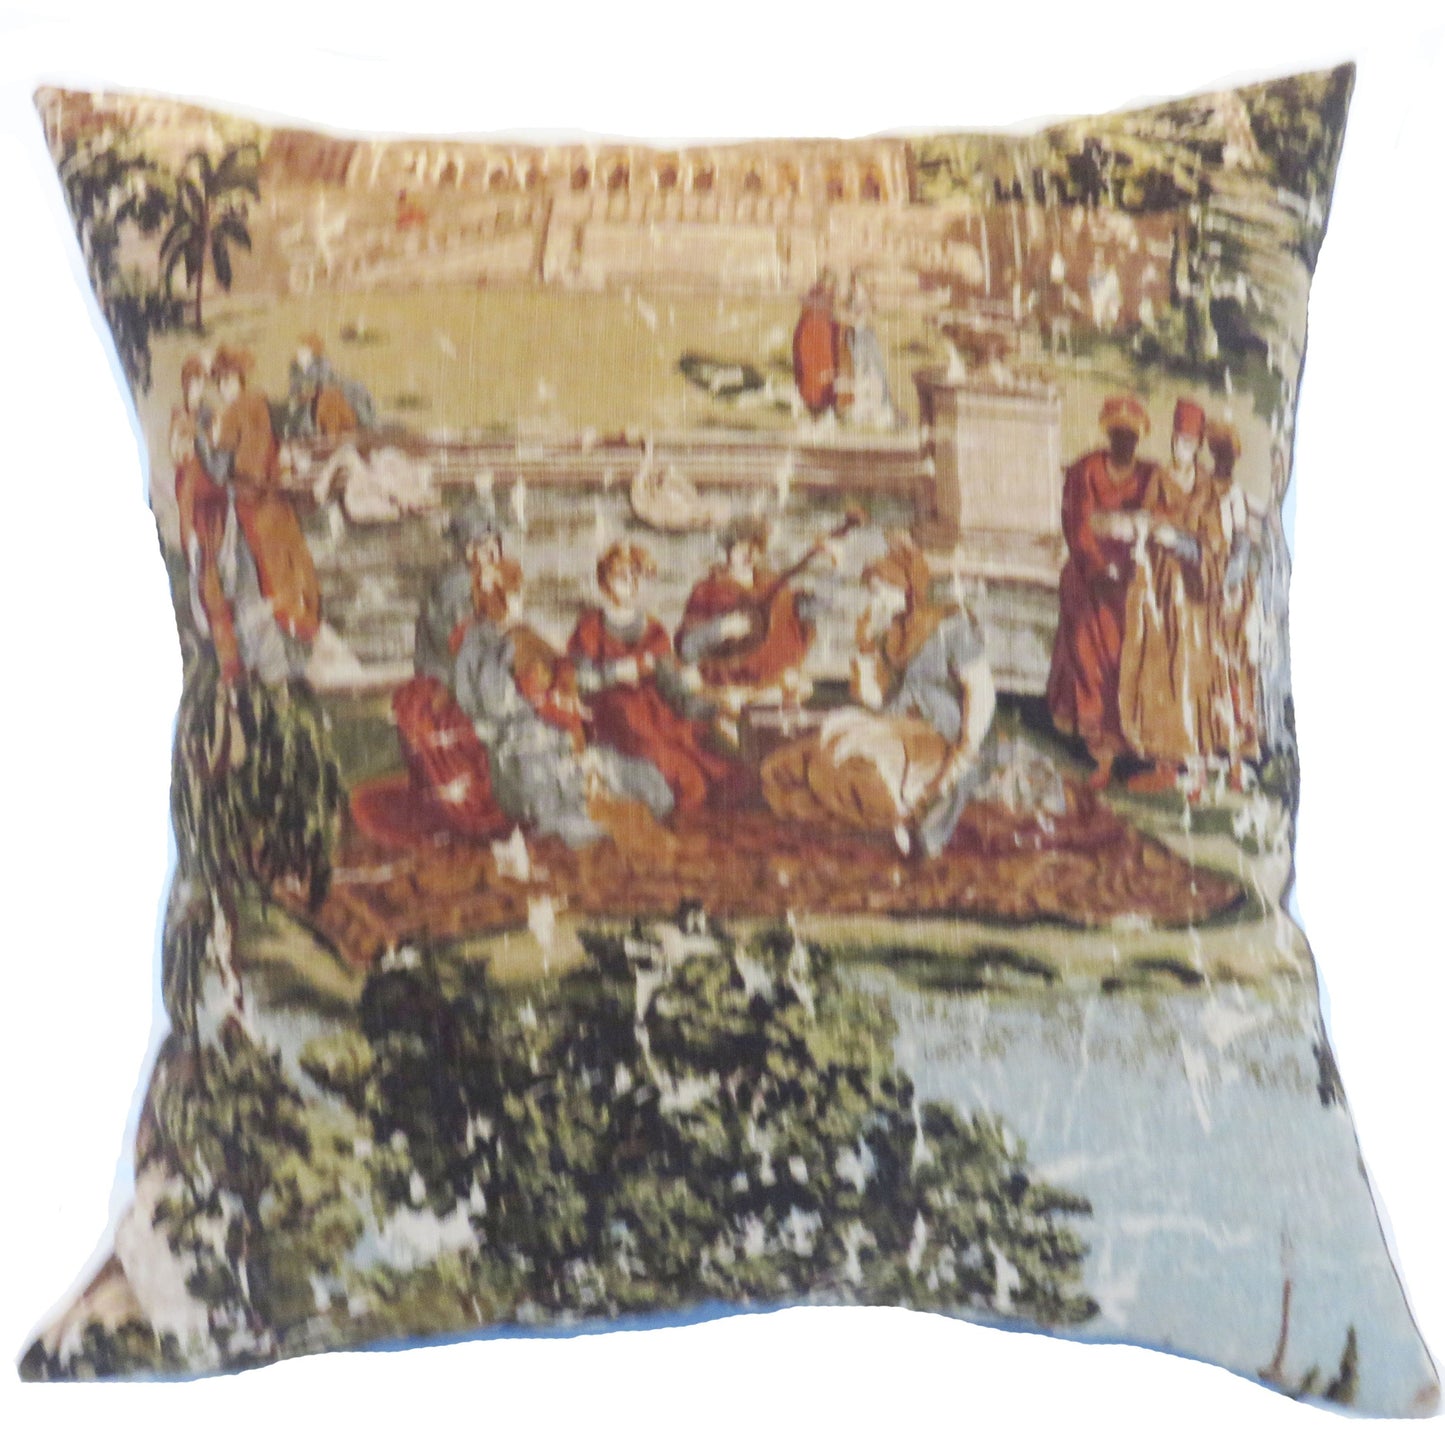 C- Abu dusk pictorial toile pillow cover